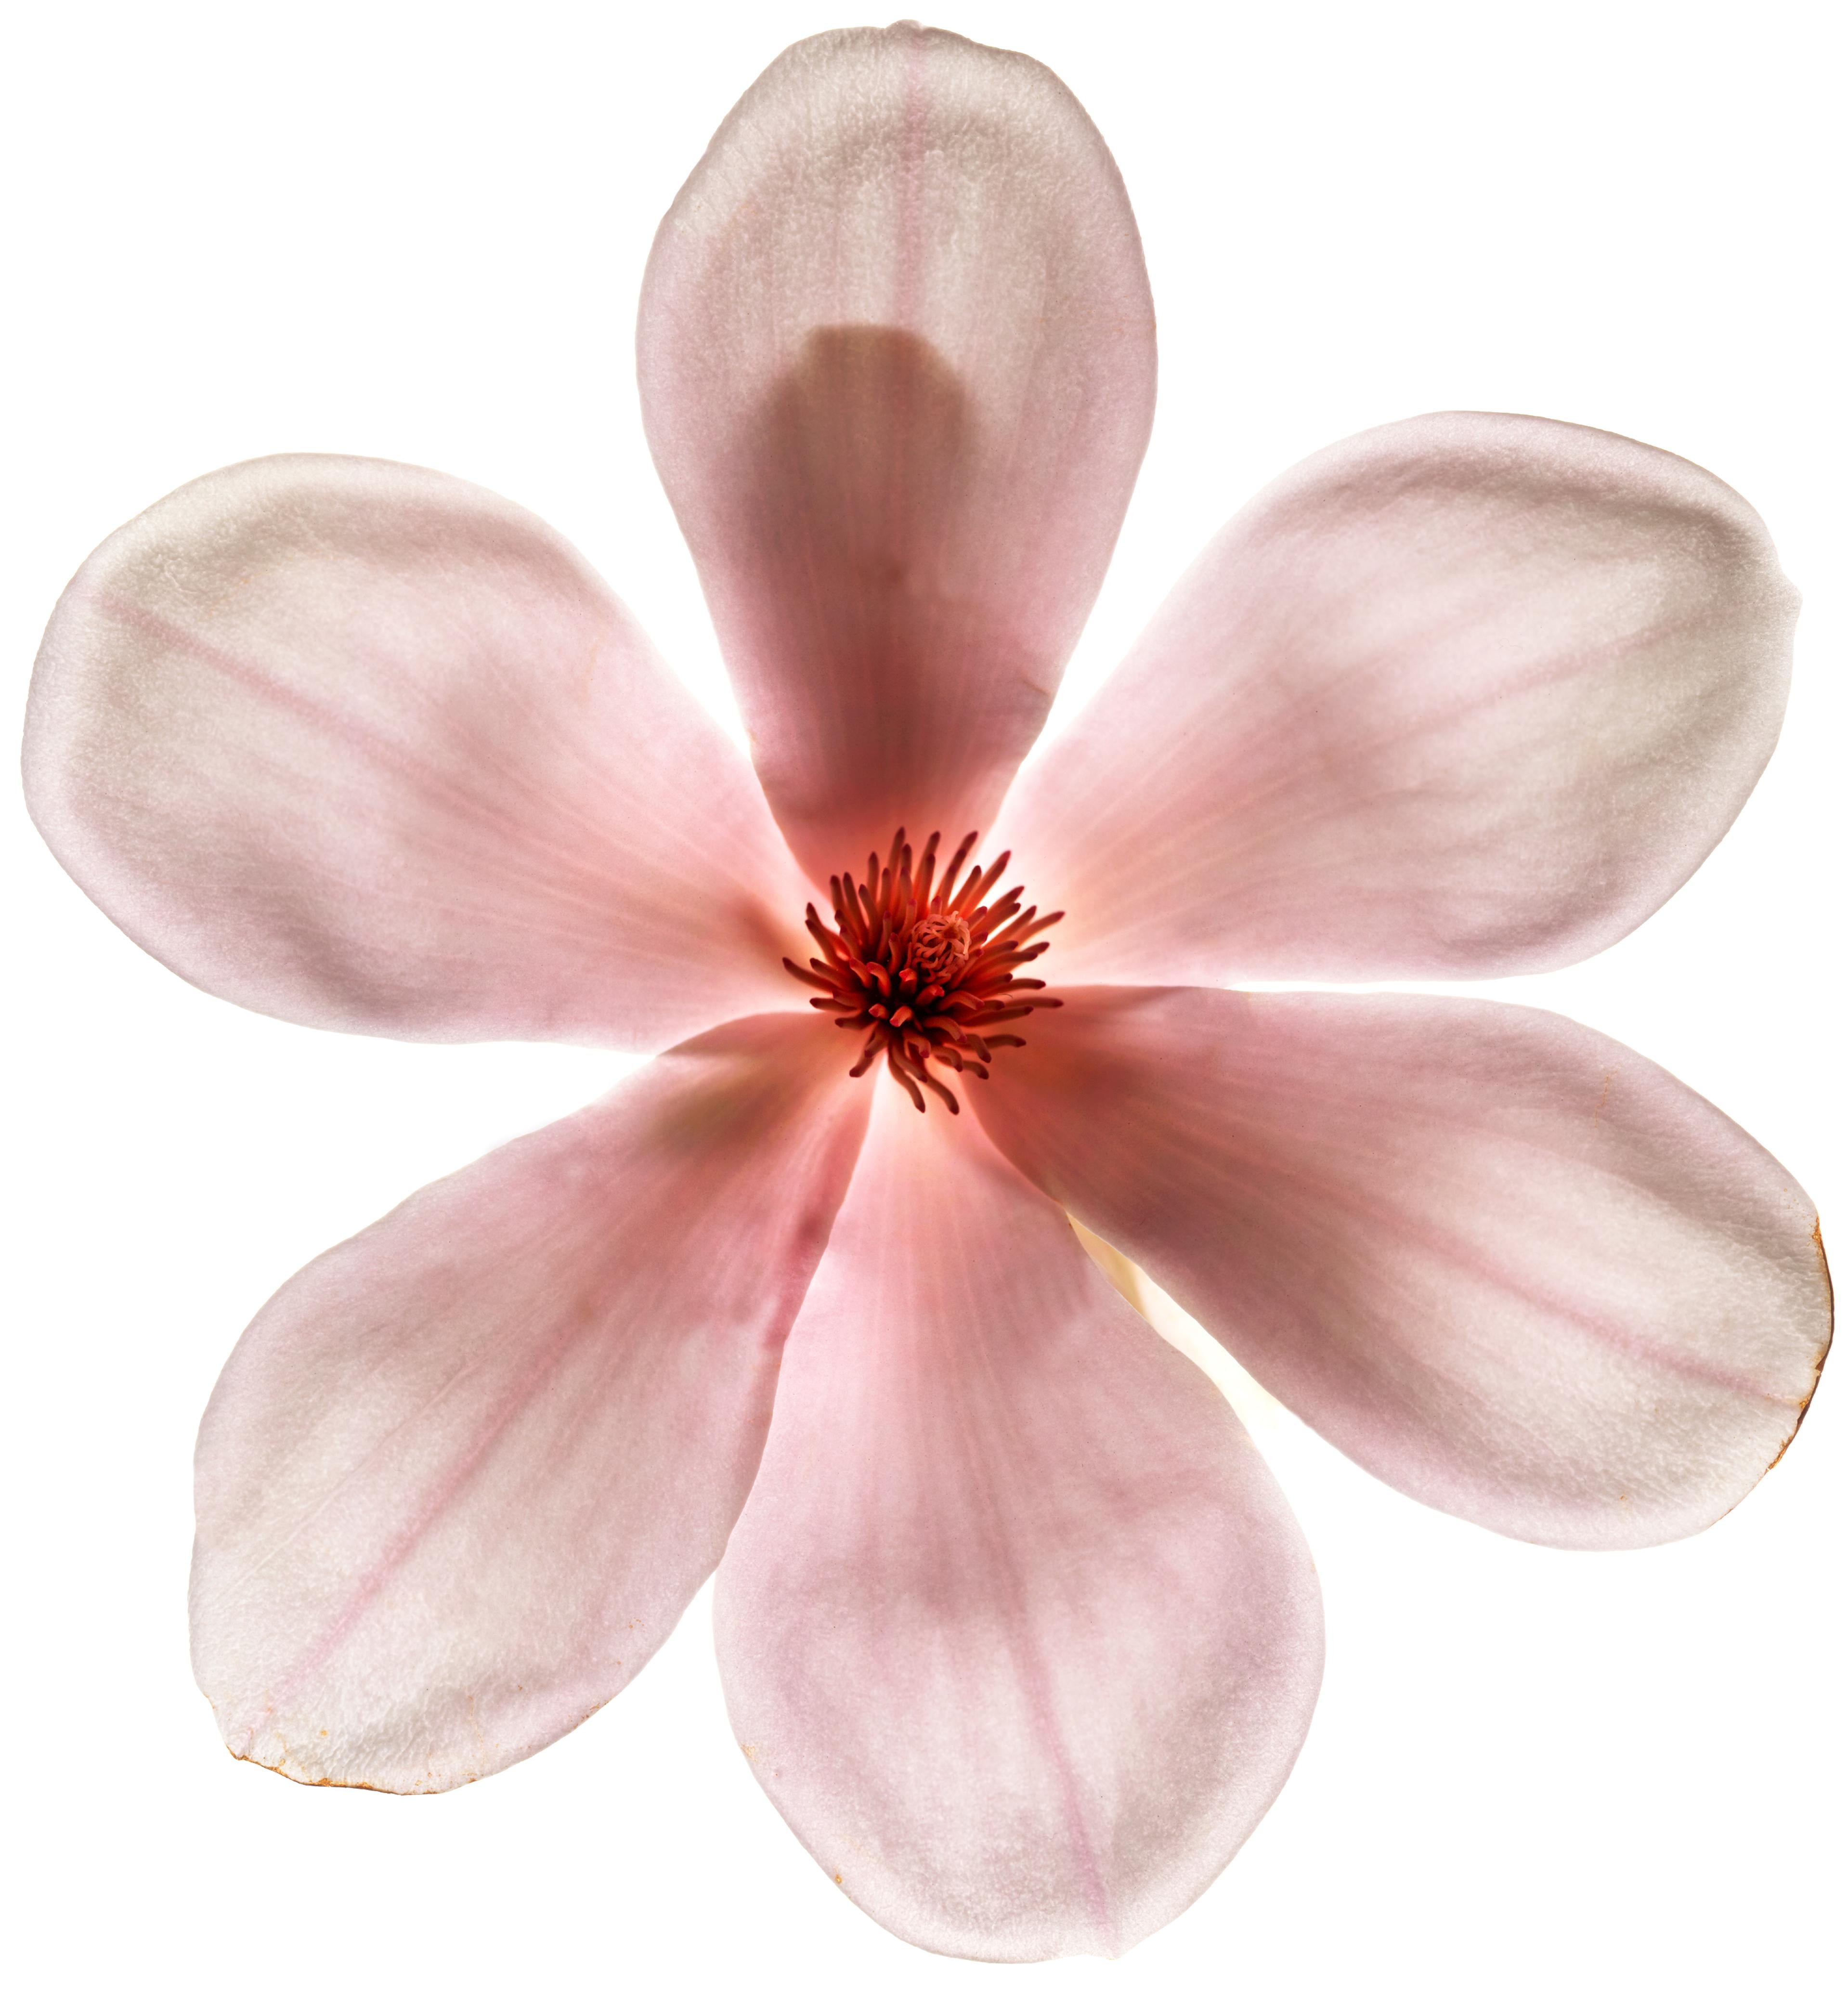 Chad Kleitsch Color Photograph - Untitled Flower # 49 (20" x 24")